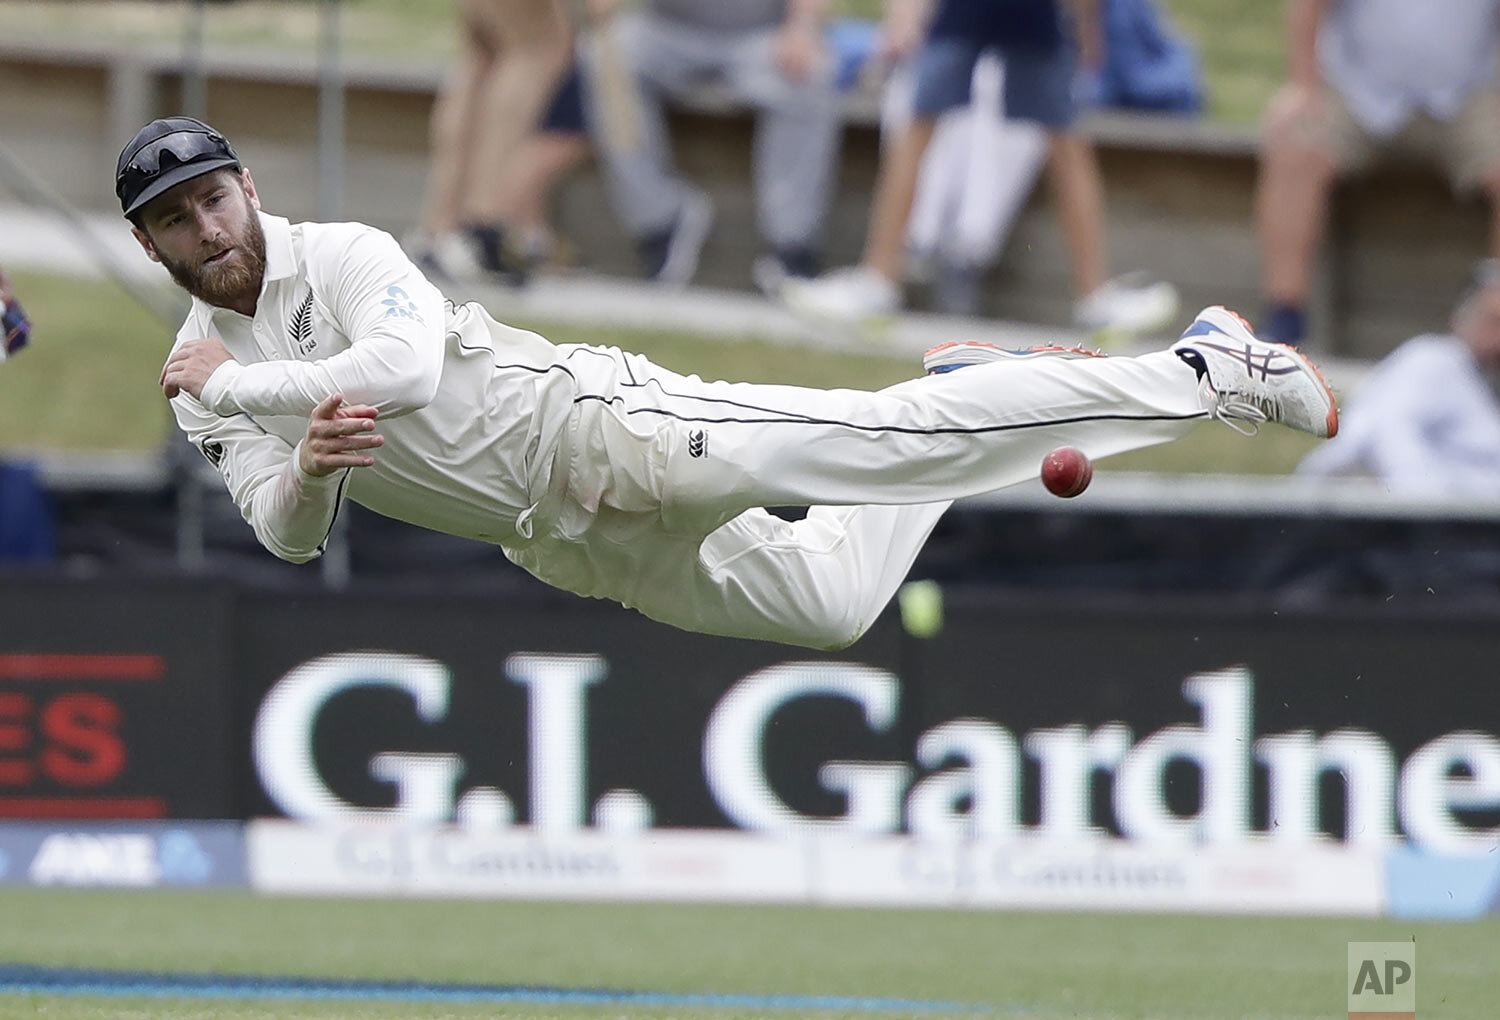  New Zealand's Kane Williamson is airborne as he throws the ball at the stumps during play on day three of the second cricket test between England and New Zealand at Seddon Park in Hamilton, New Zealand, Sunday, Dec. 1, 2019. (AP Photo/Mark Baker) 